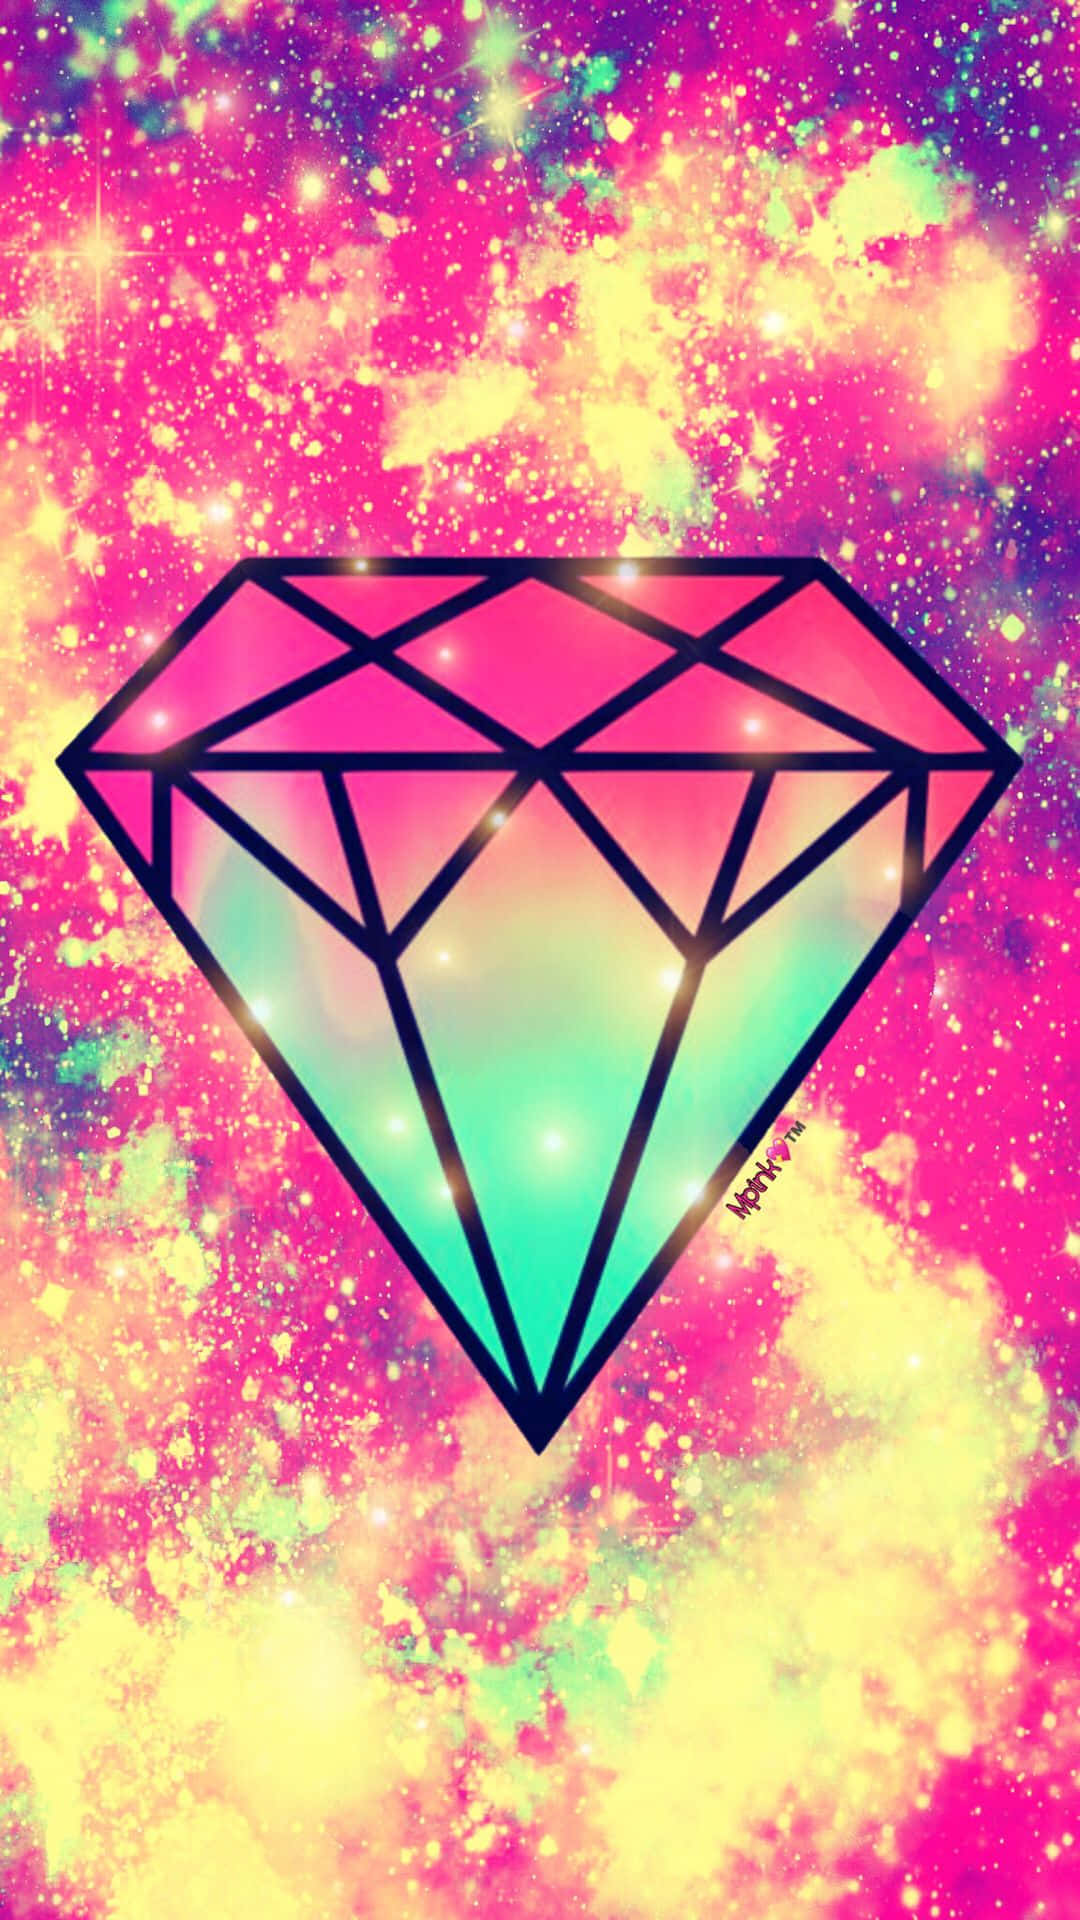 A Diamond On A Pink And Blue Background Wallpaper